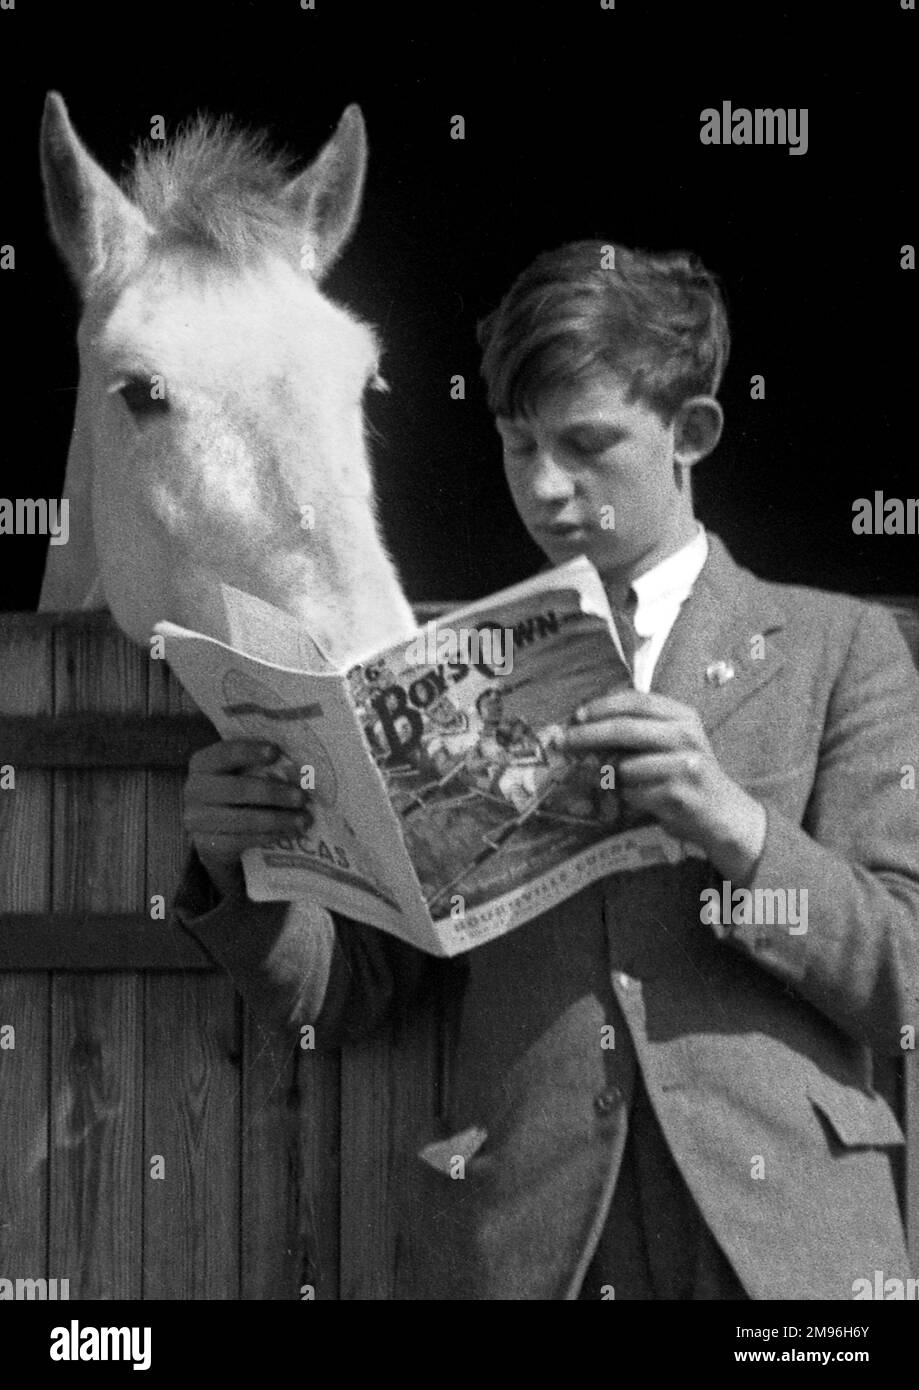 A boy stands reading his Boy's Own magazine, while a white horse appears to be reading over his shoulder. Stock Photo